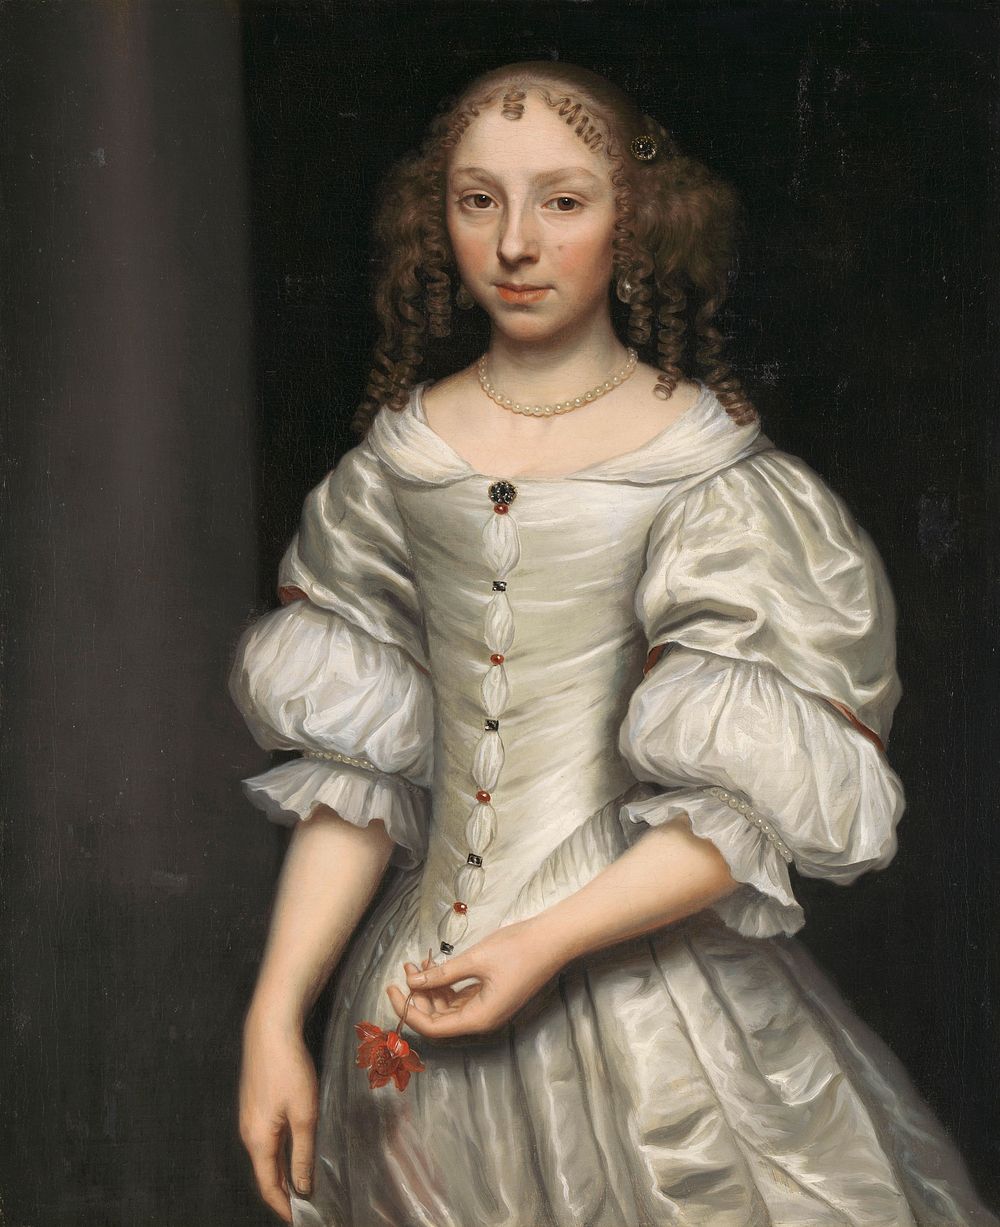 Portrait of a woman (1660 - 1677) by Wallerant Vaillant